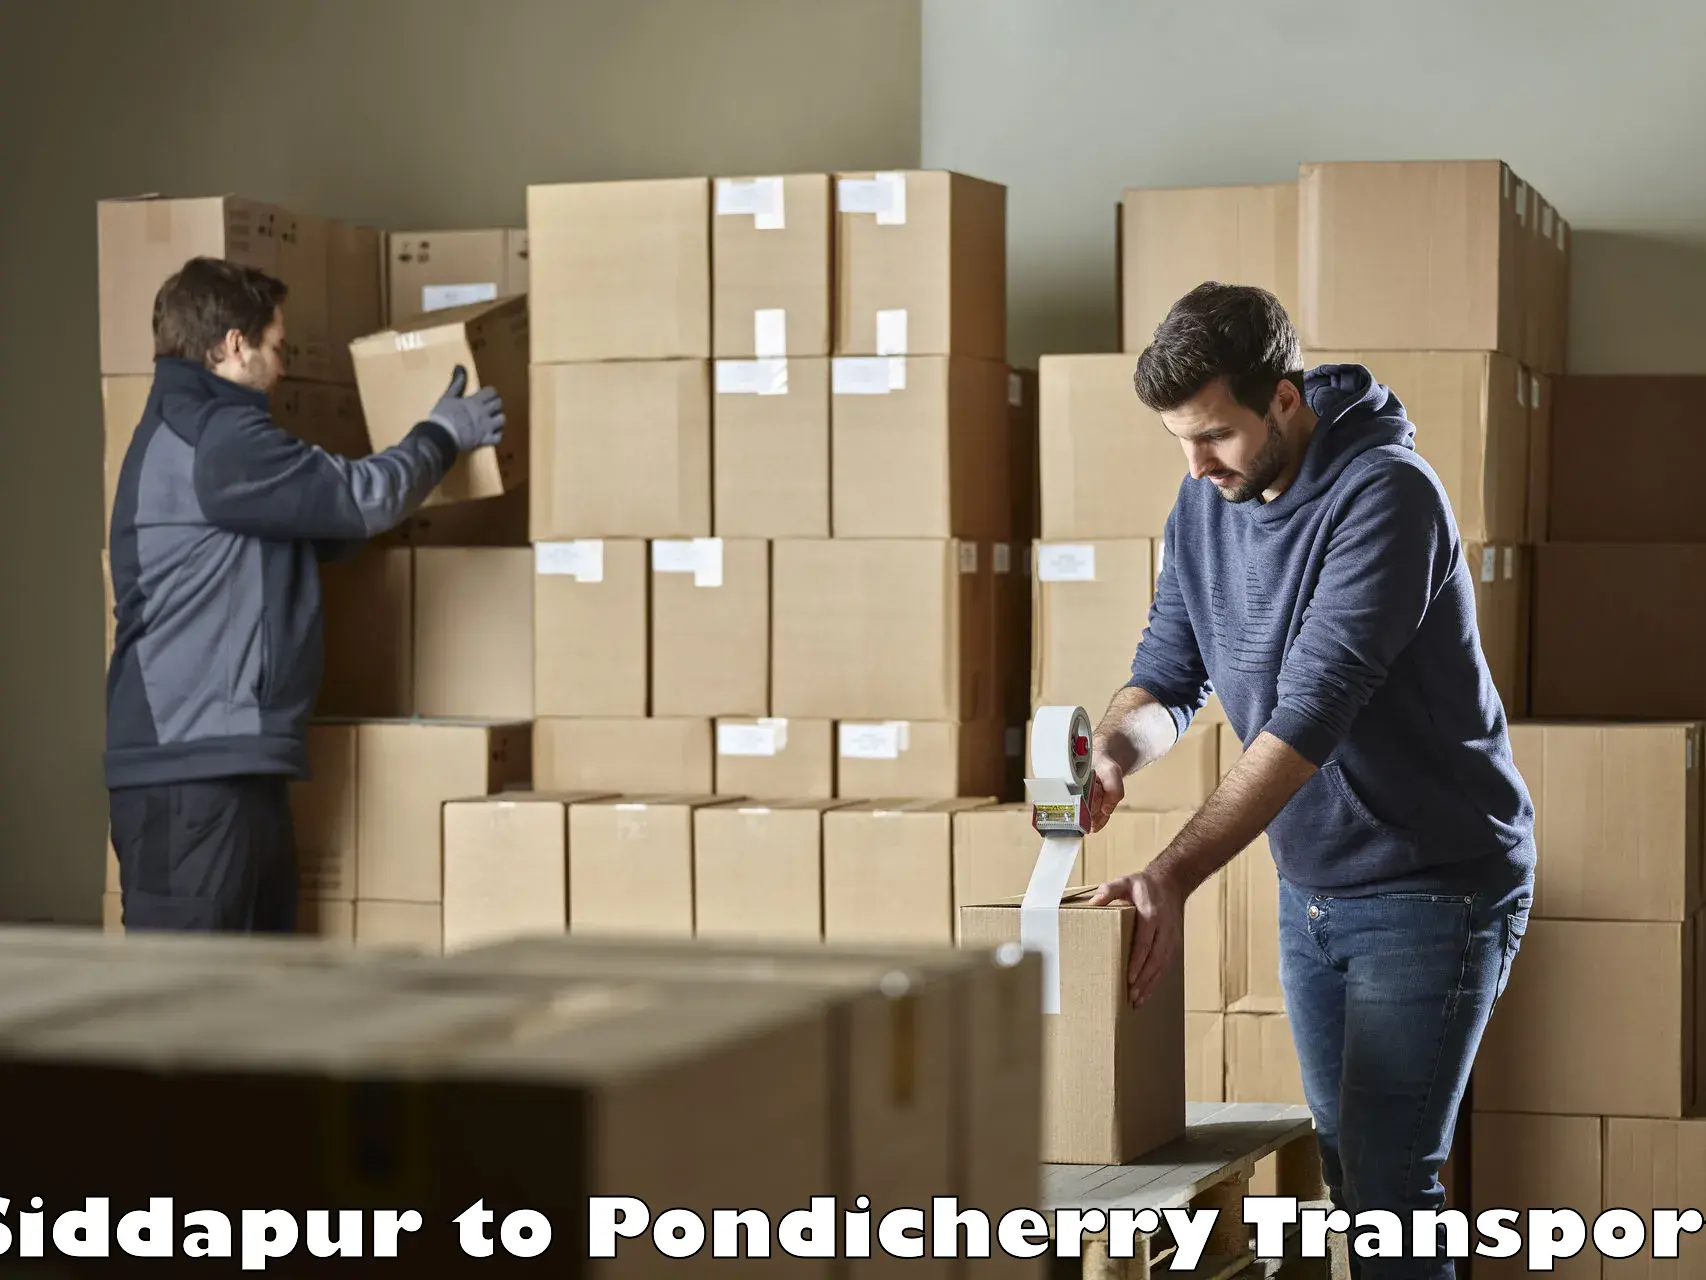 Container transport service Siddapur to Pondicherry University